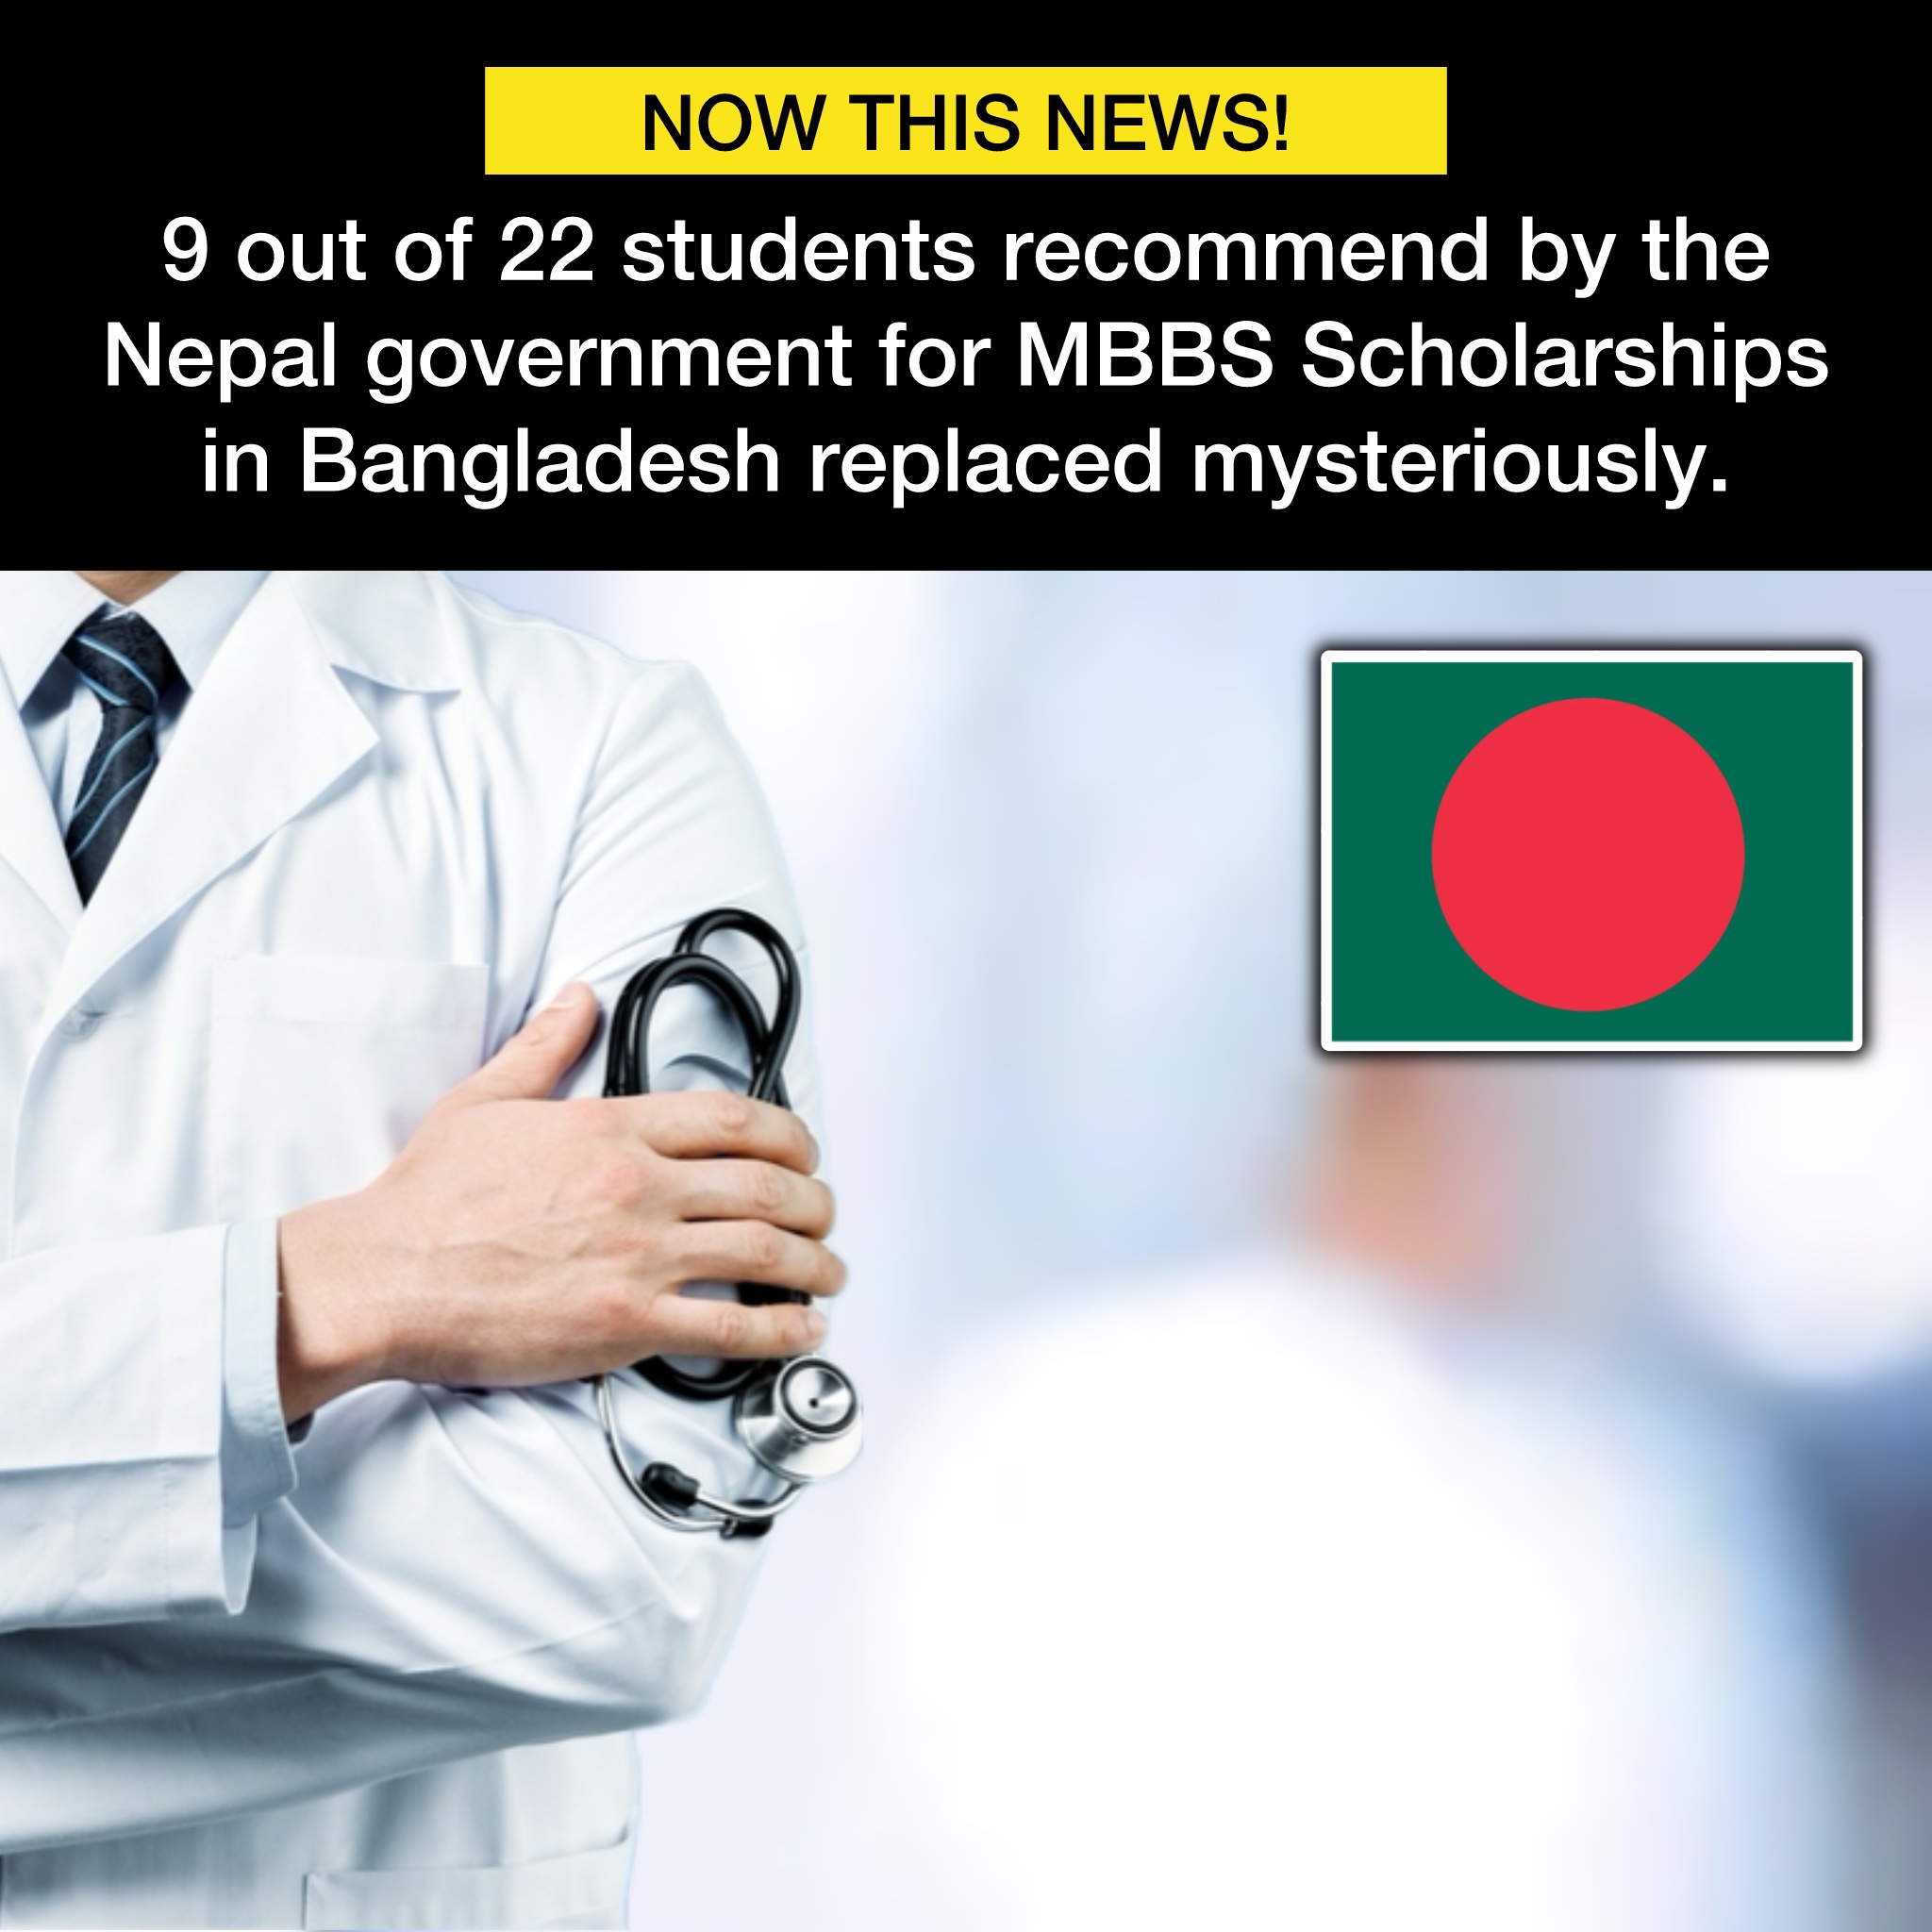 Controversy Arises as 9 of 22 Nepali MBBS Scholarship Recipients in Bangladesh Replaced Mysteriously